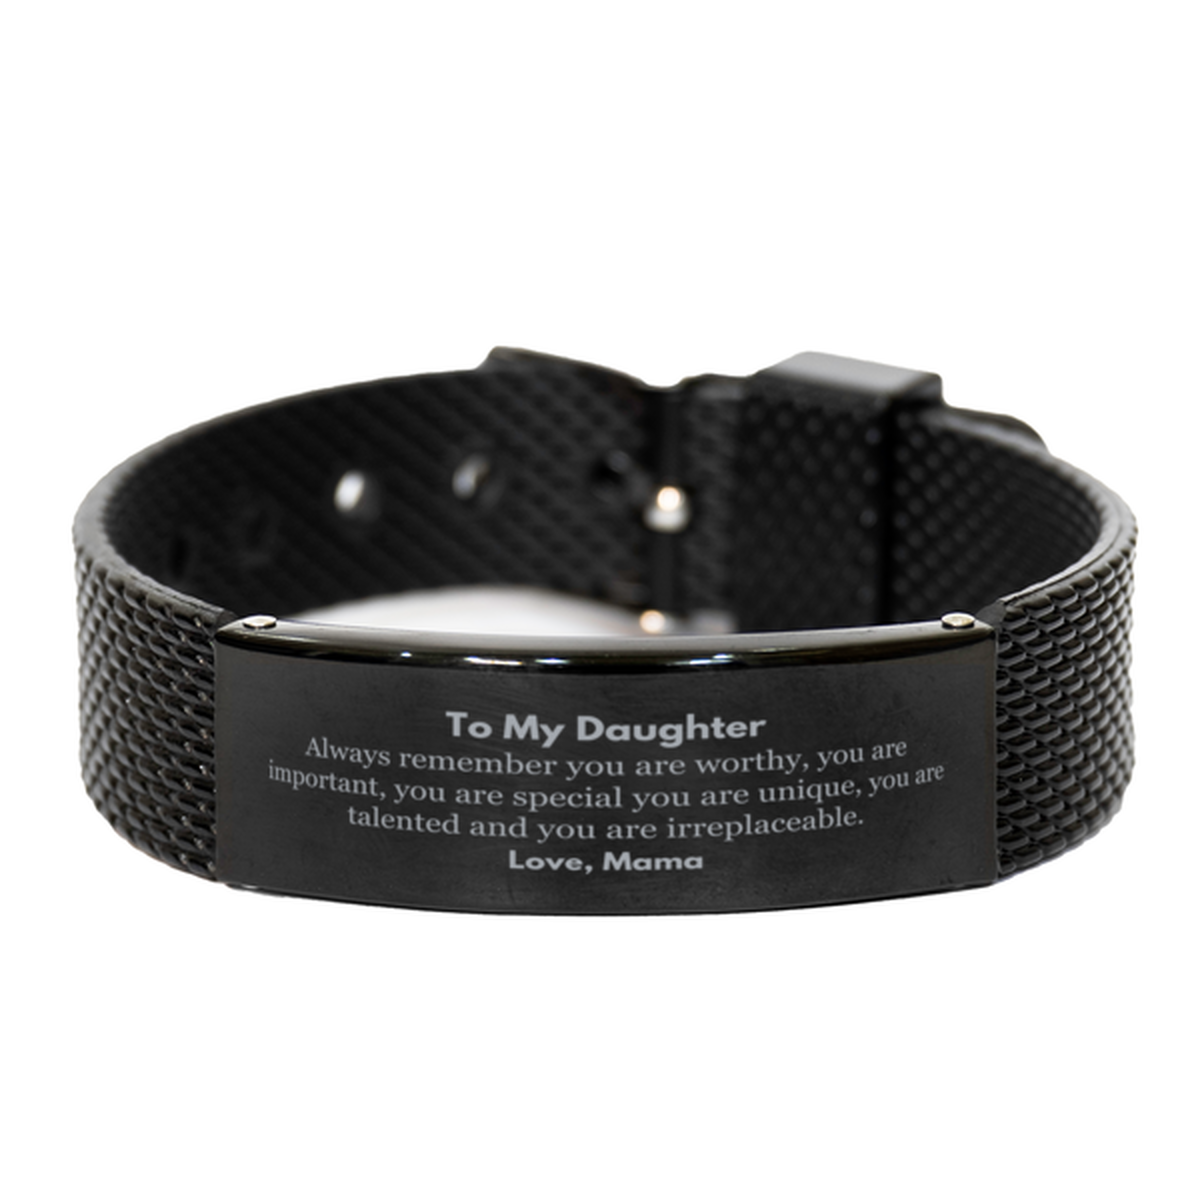 Daughter Birthday Gifts from Mama, Inspirational Black Shark Mesh Bracelet for Daughter Christmas Graduation Gifts for Daughter Always remember you are worthy, you are important. Love, Mama